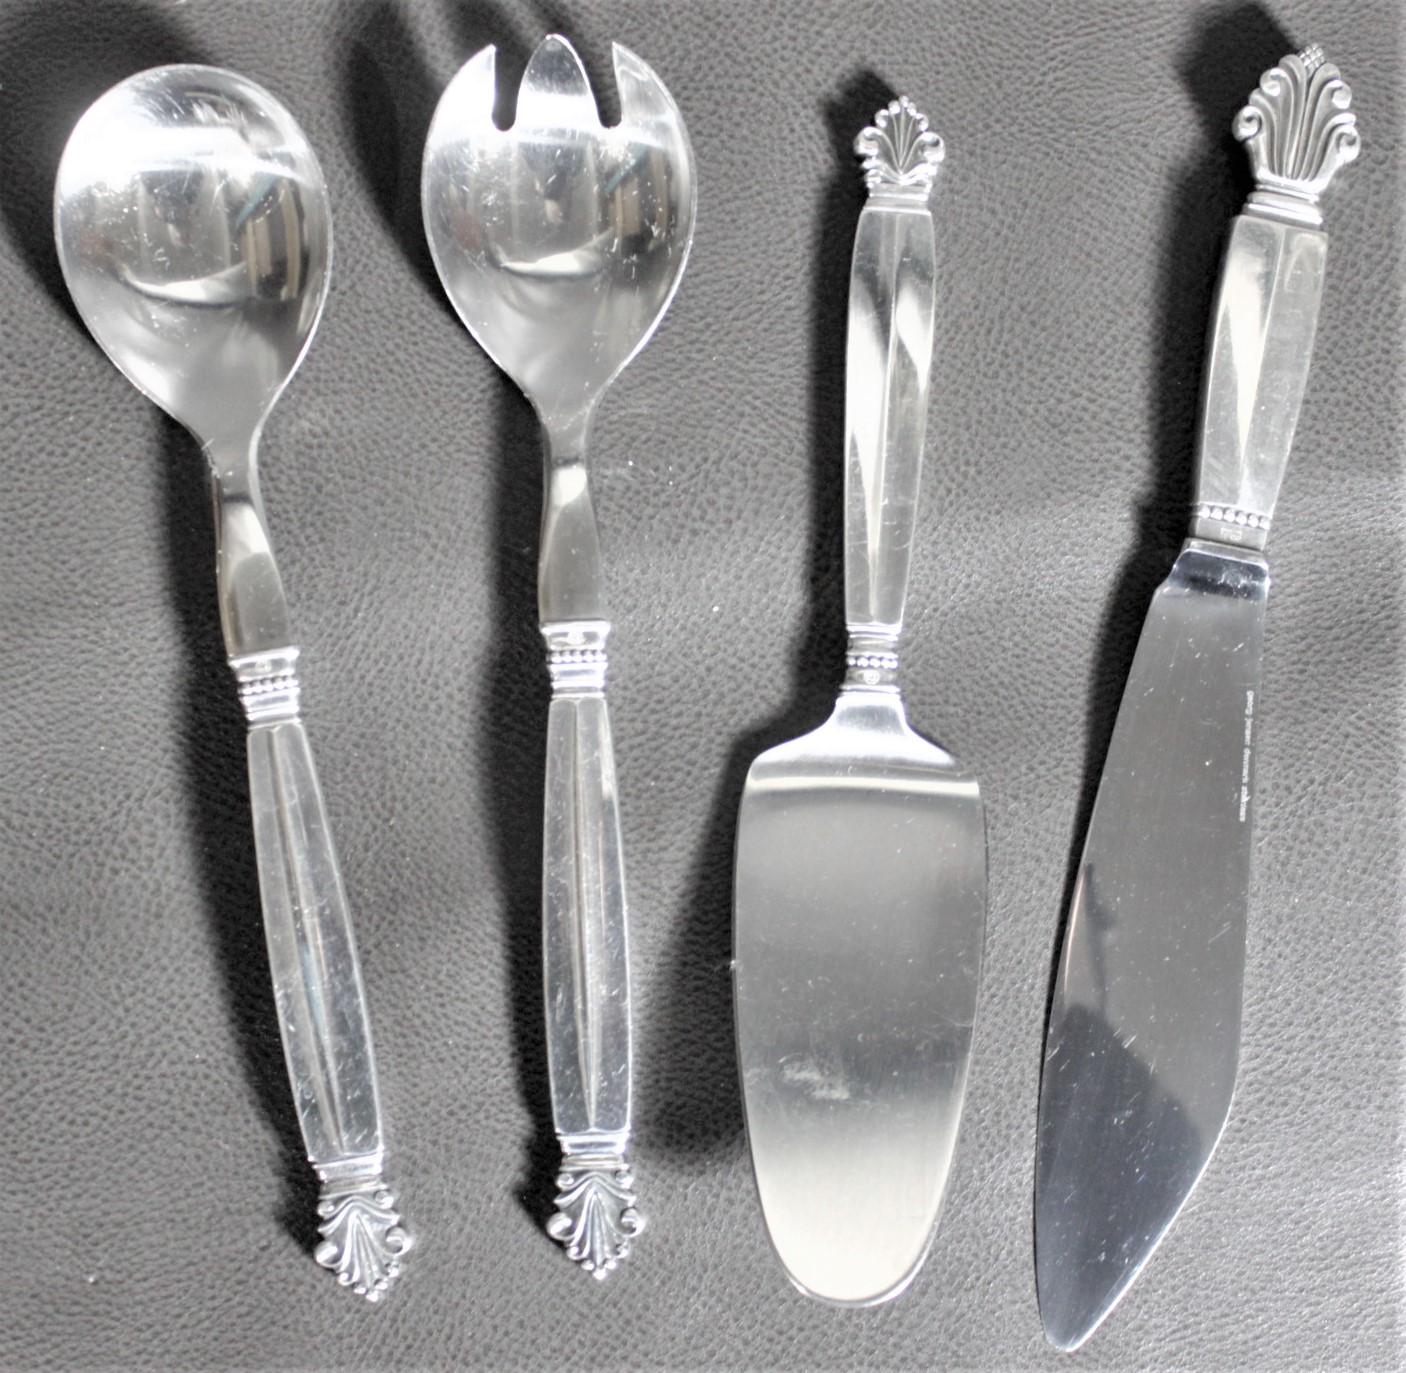 This set of four sterling silver serving pieces was made by the renowned Danish silversmith, Georg Jensen in circa 1960 in his Art Deco styled Acanthus pattern. This grouping includes a cake server and knife and two salad servers.